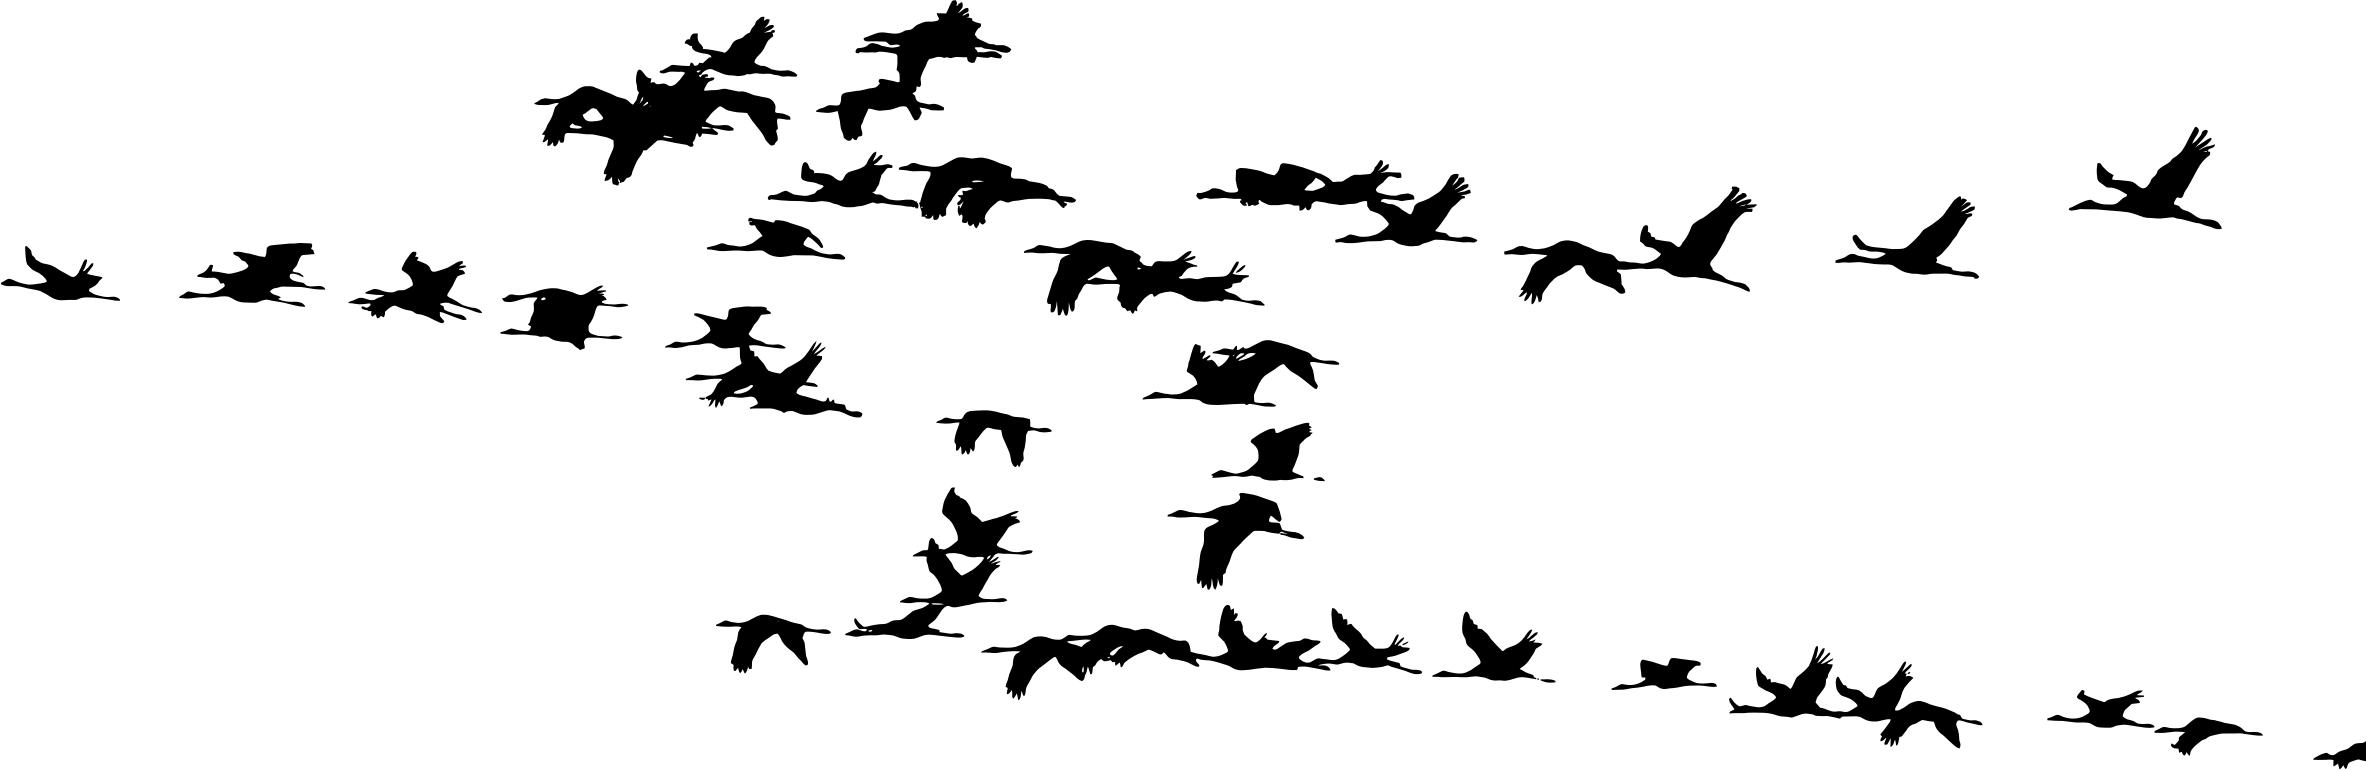 Flock Of Cranes Silhouette png